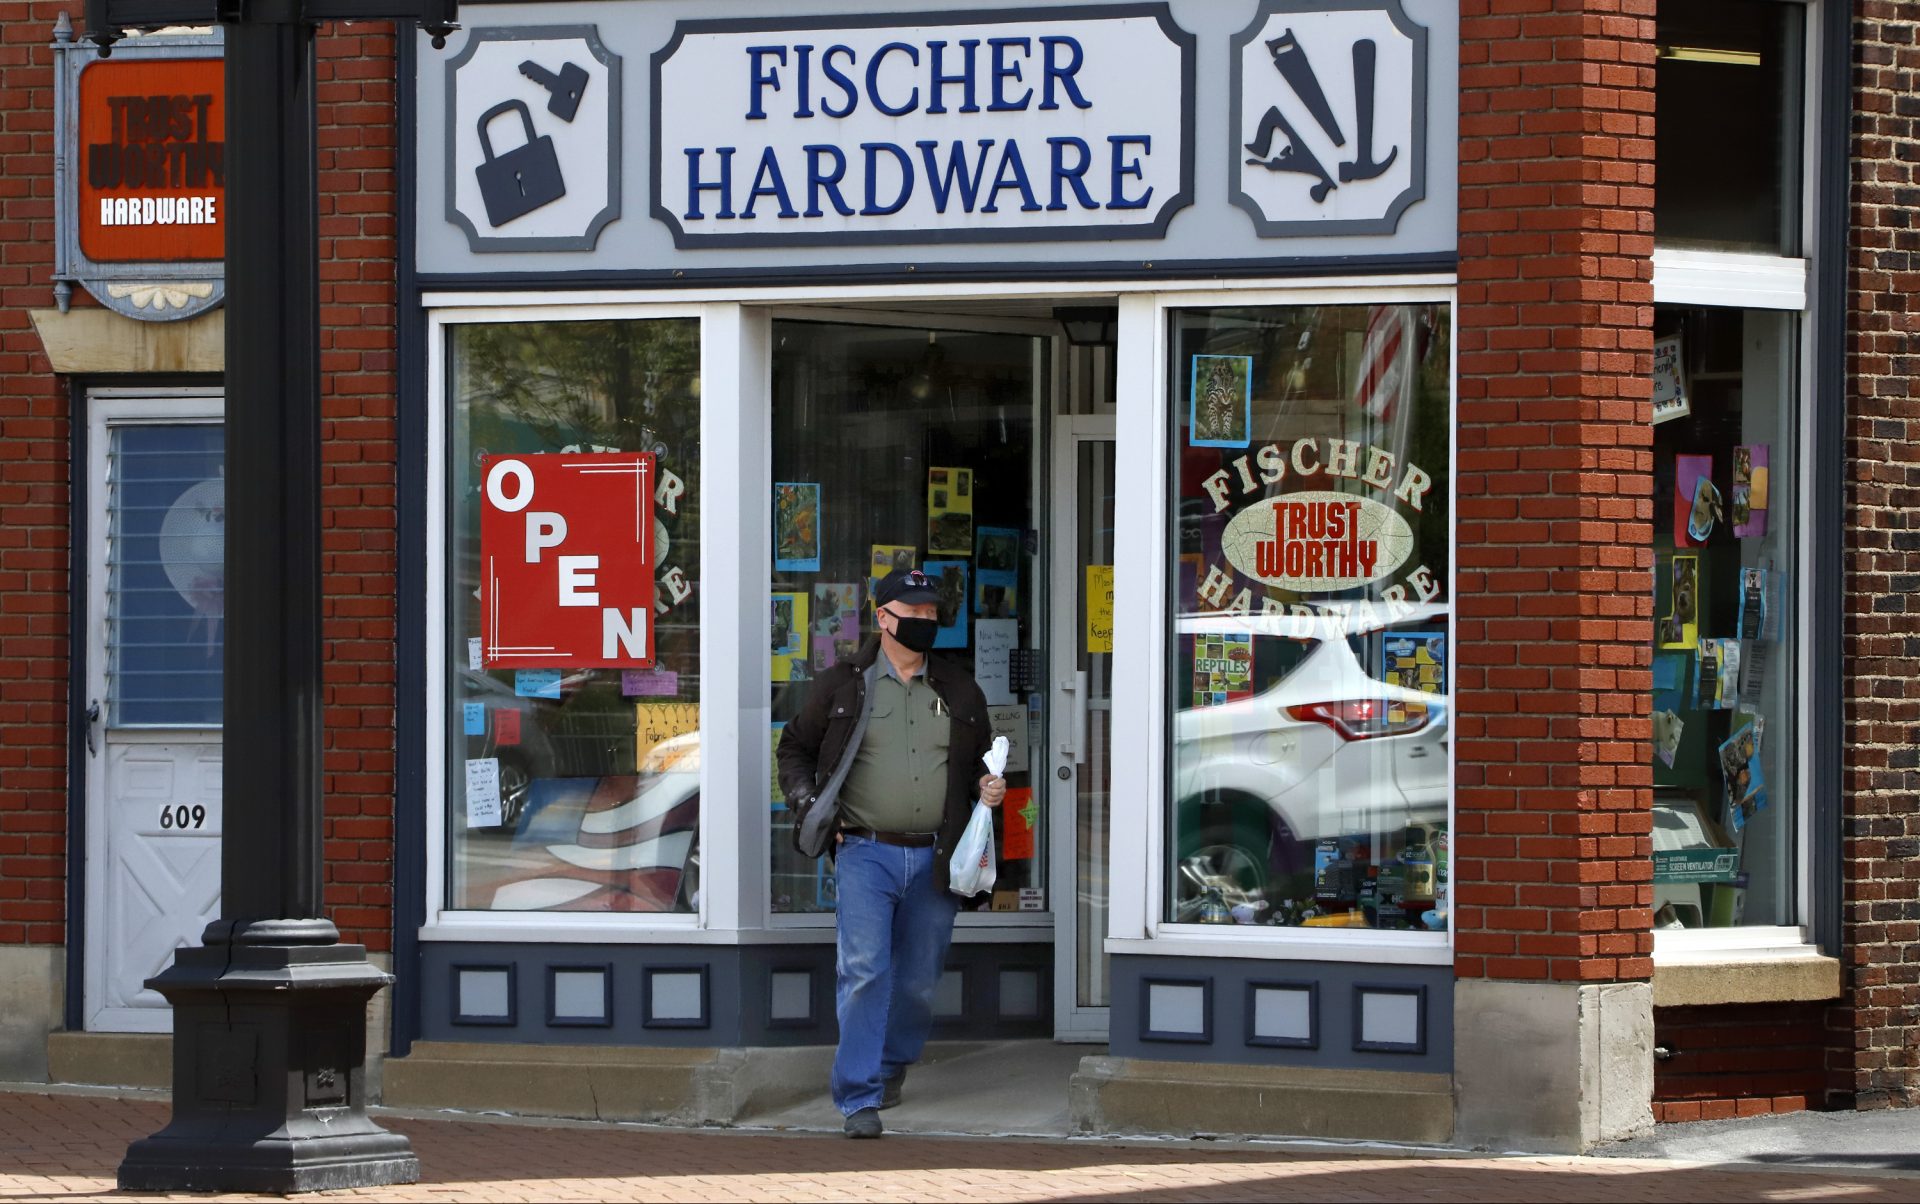 A customer exits Fischer Hardware in Beaver, Pa., Tuesday, May 12, 2020. Beaver County Commissioners have said they disagree with Pennsylvania Governor Tom Wolf and the county will act as if they are transitioning to the "yellow" phase on May 15. Pennsylvania Governor Tom Wolf announced, May 8, that 13 southwestern Pennsylvania counties, not including Beaver County, that would remain in the "red" phase where the stay-at-home order is still in effect, would move to the "yellow" phase on May 15.